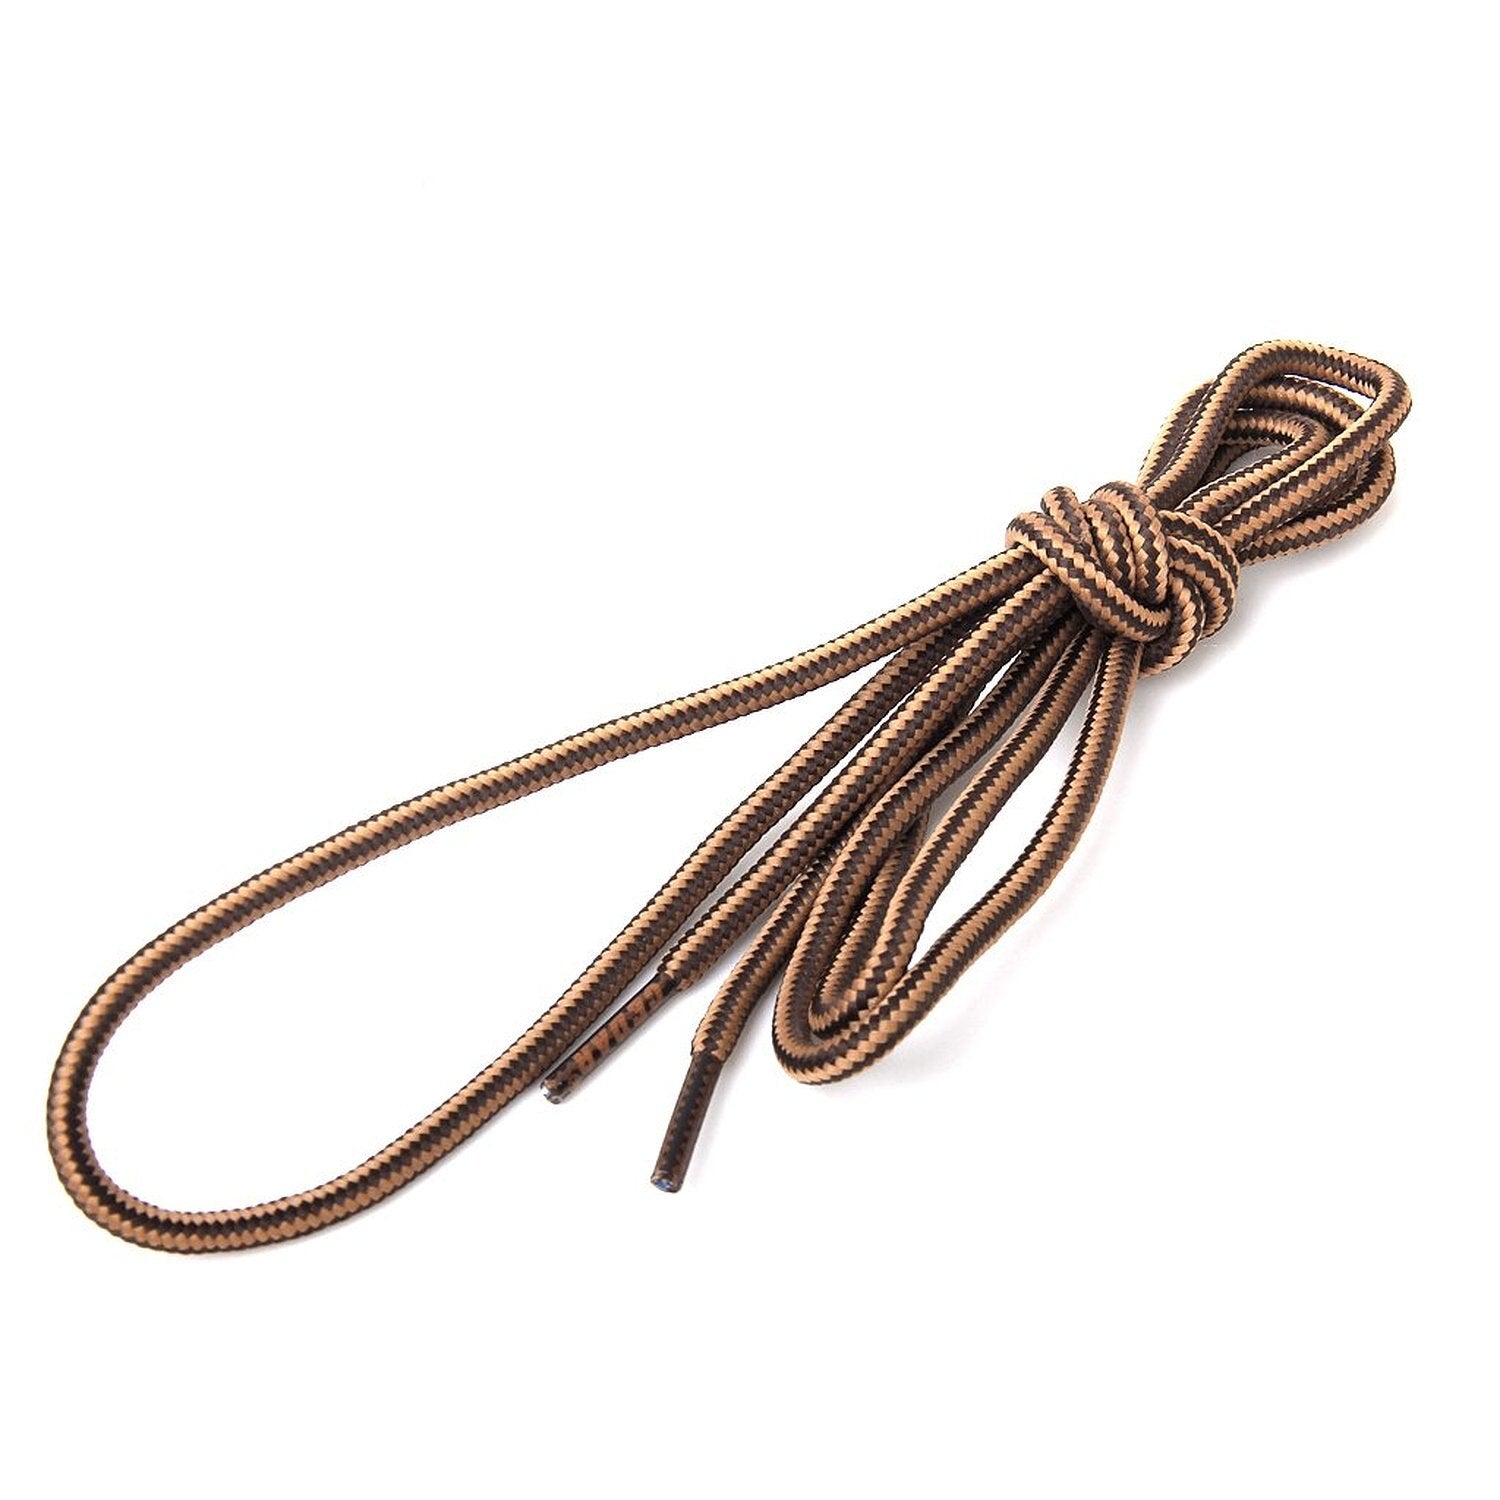 New 1 pair 150 cm Durable High Resistance Laces for Hiking Shoes - Brown Coffee Stripes - ebowsos